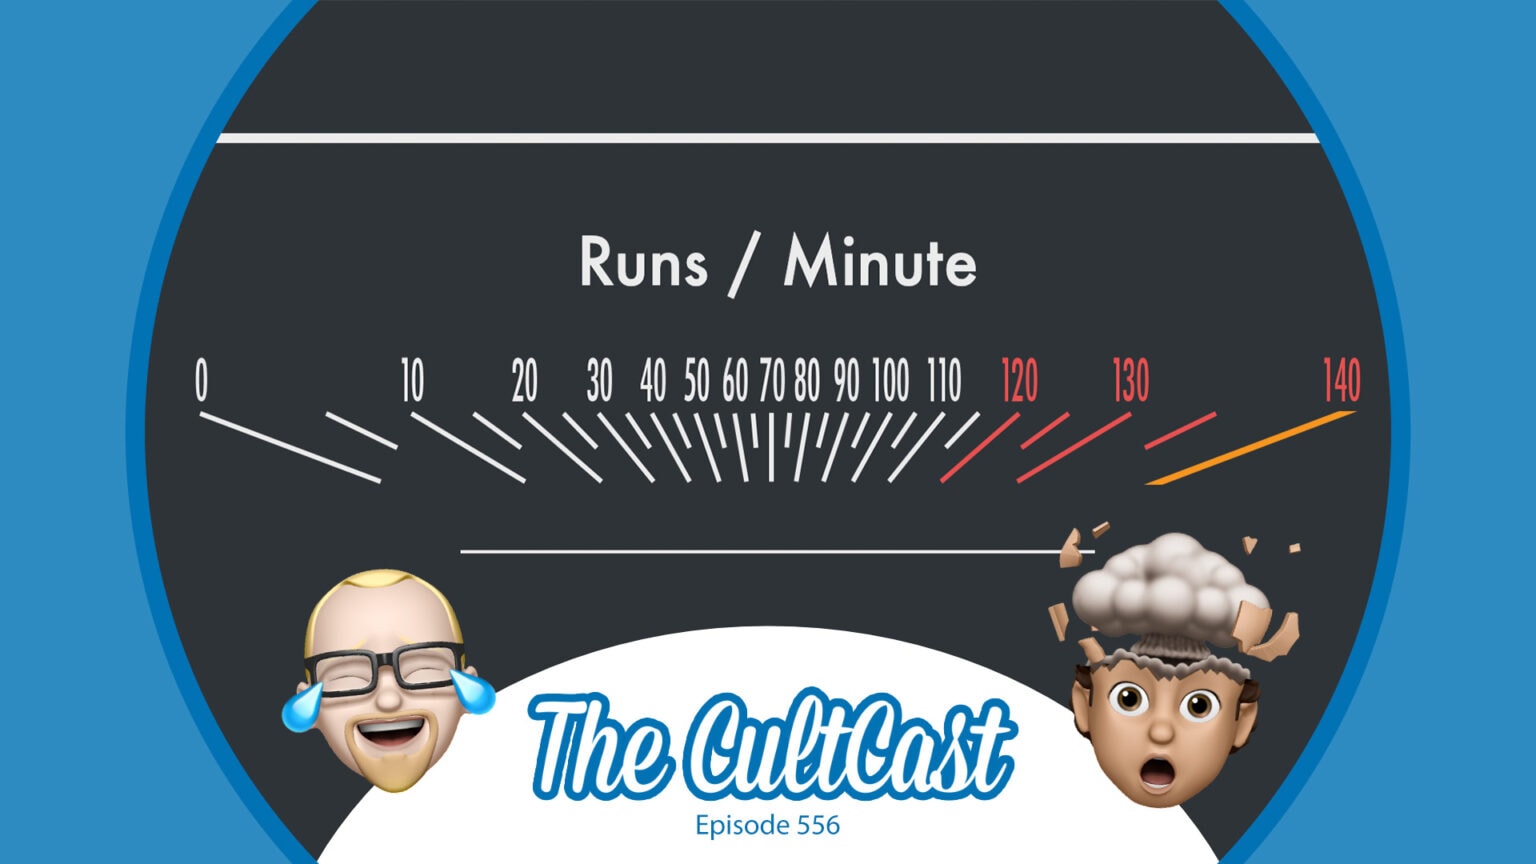 The CultCast Apple podcast: These MacBook Air benchmarks show what a screamer the M2 chip really is.